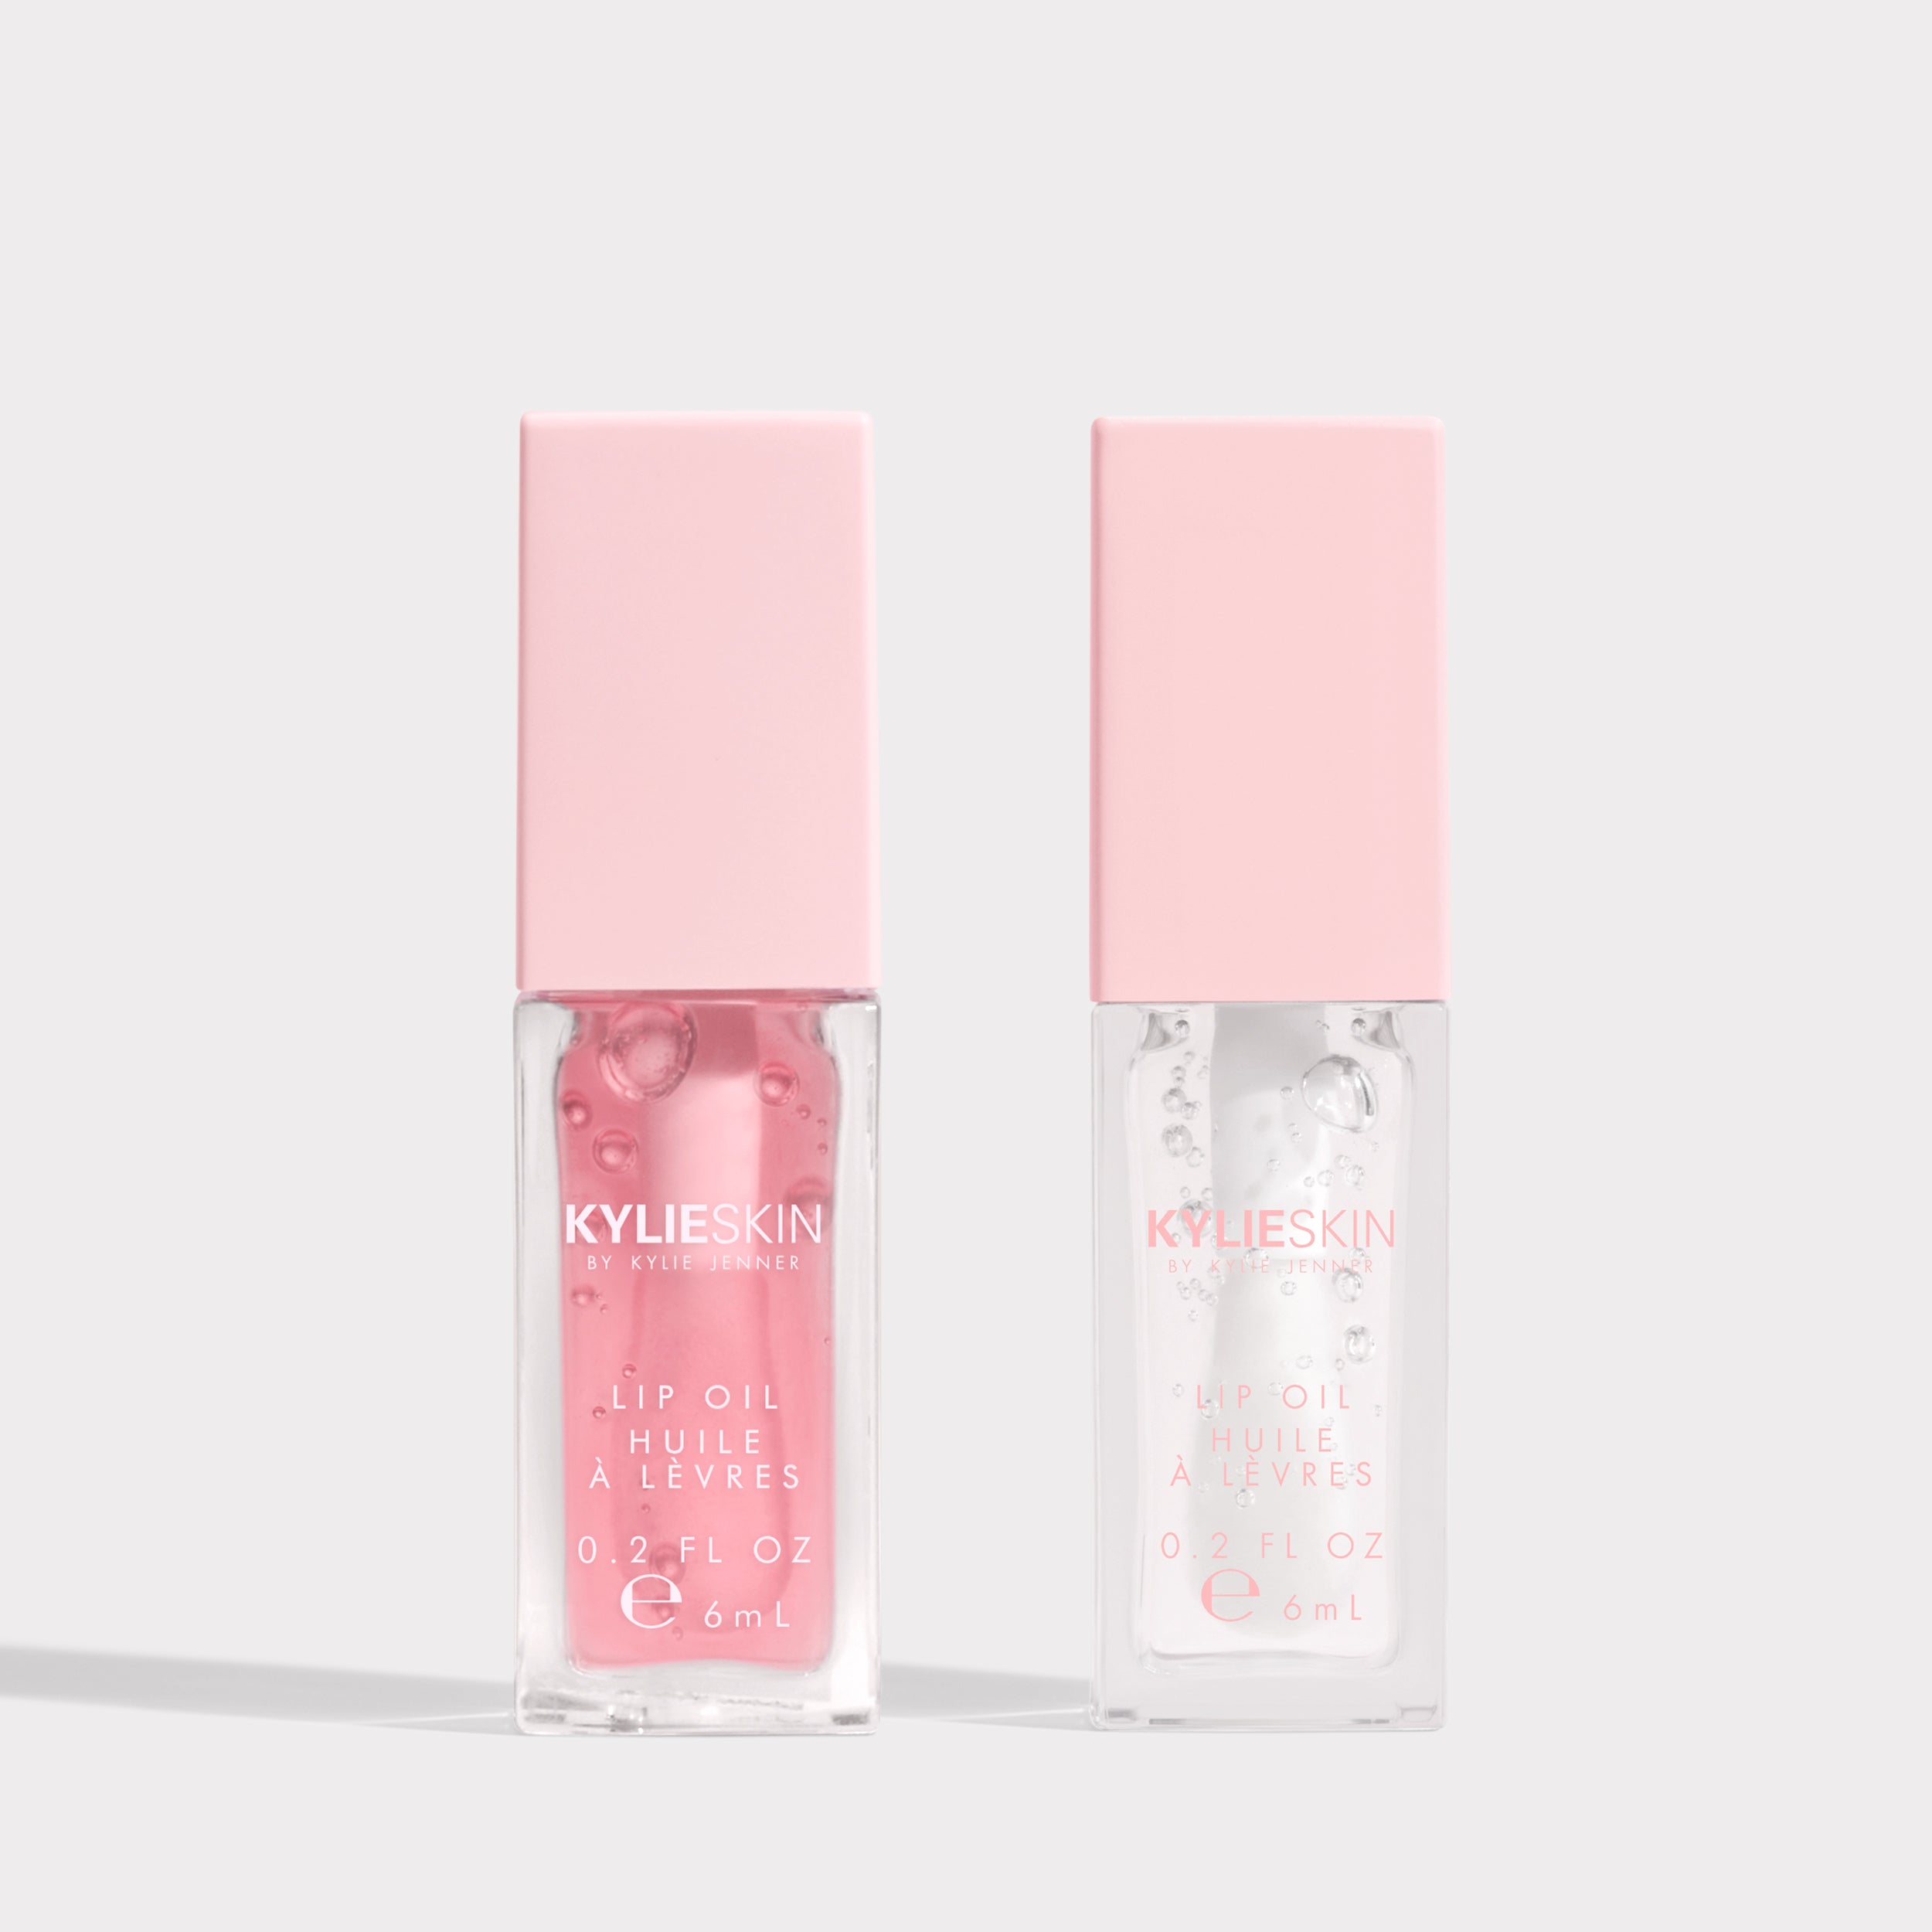 Lip Oil Duo, Kylie Skin by Kylie Jenner